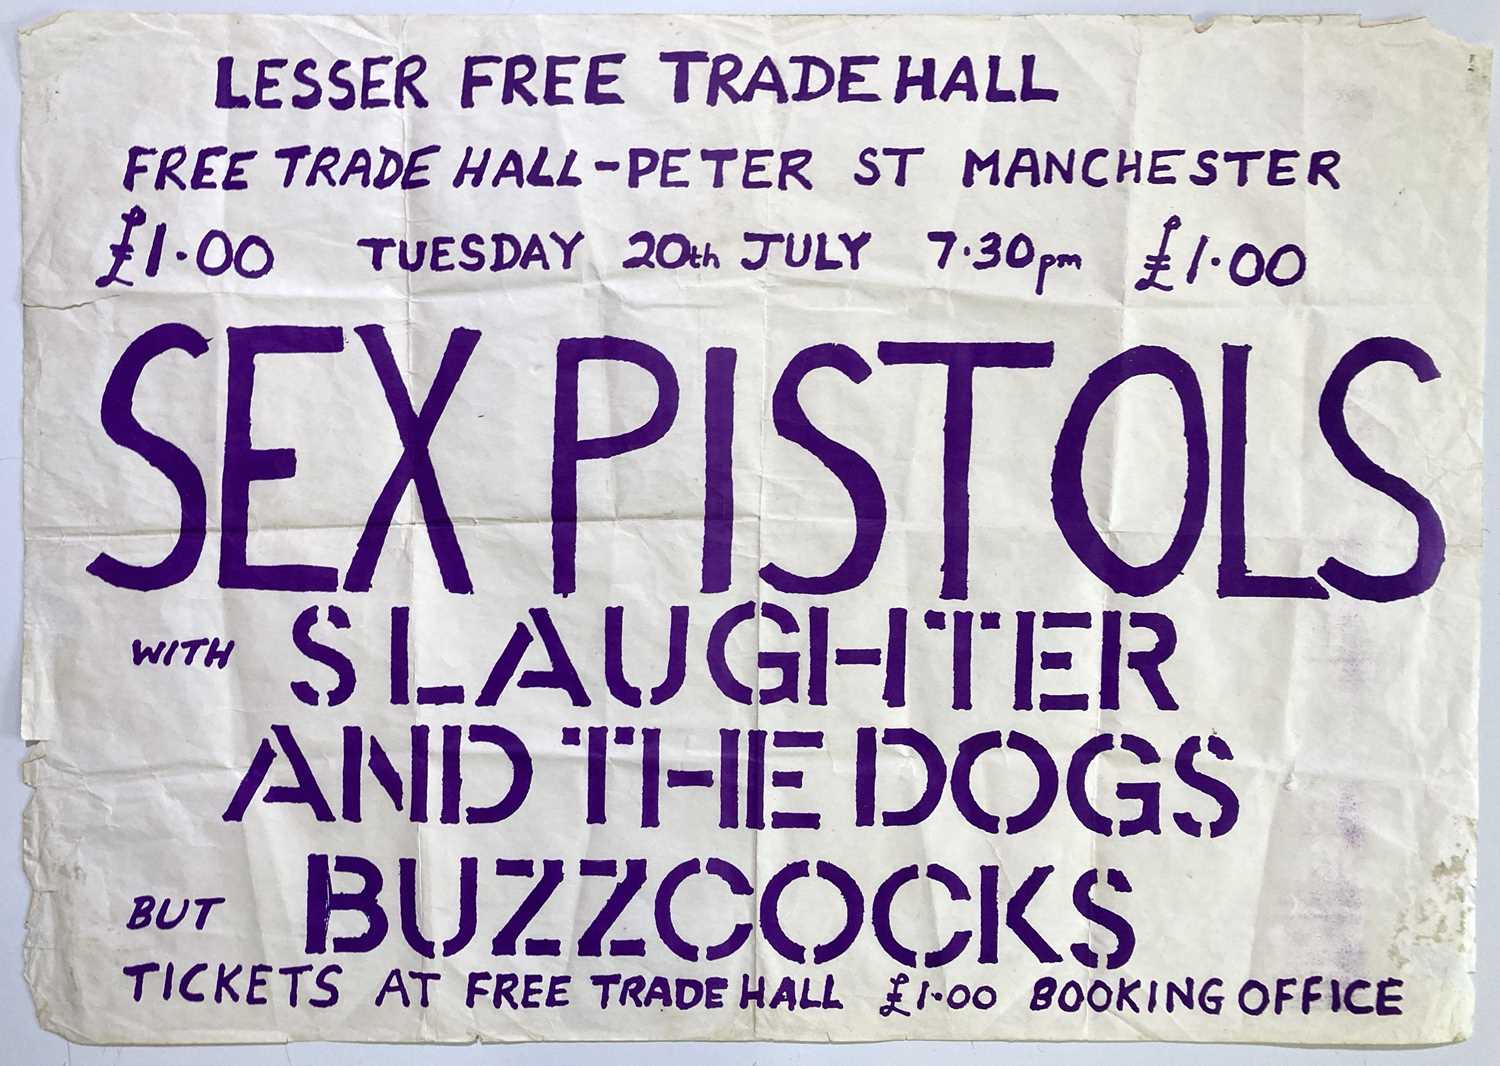 Lot 382 The Sex Pistols An Original Poster For The